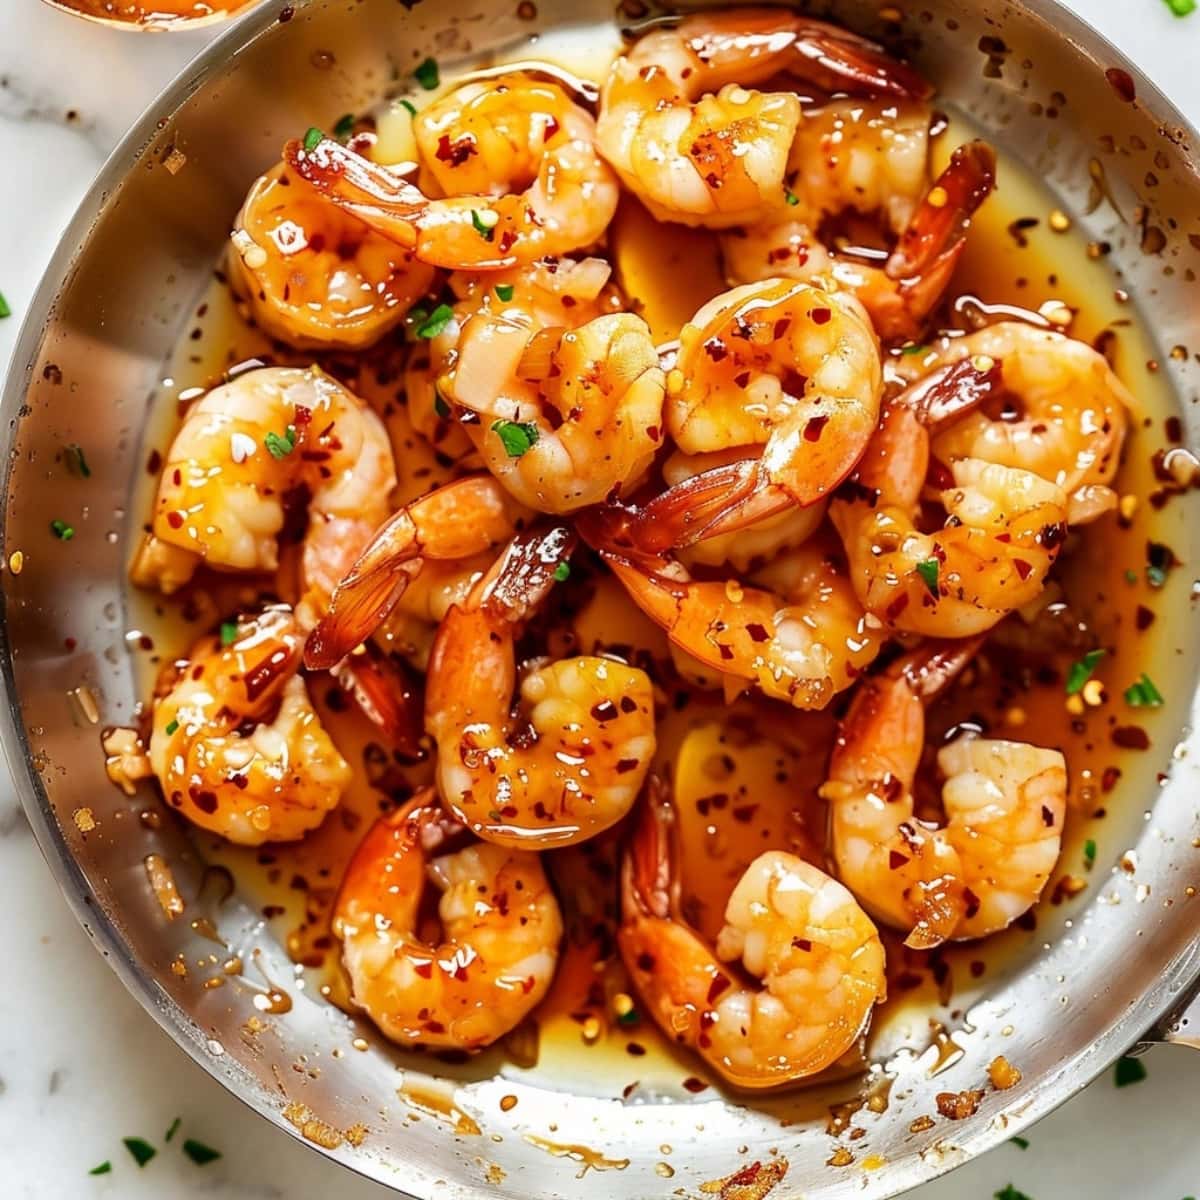 Shrimp tossed in a pan with honey garlic sauce.